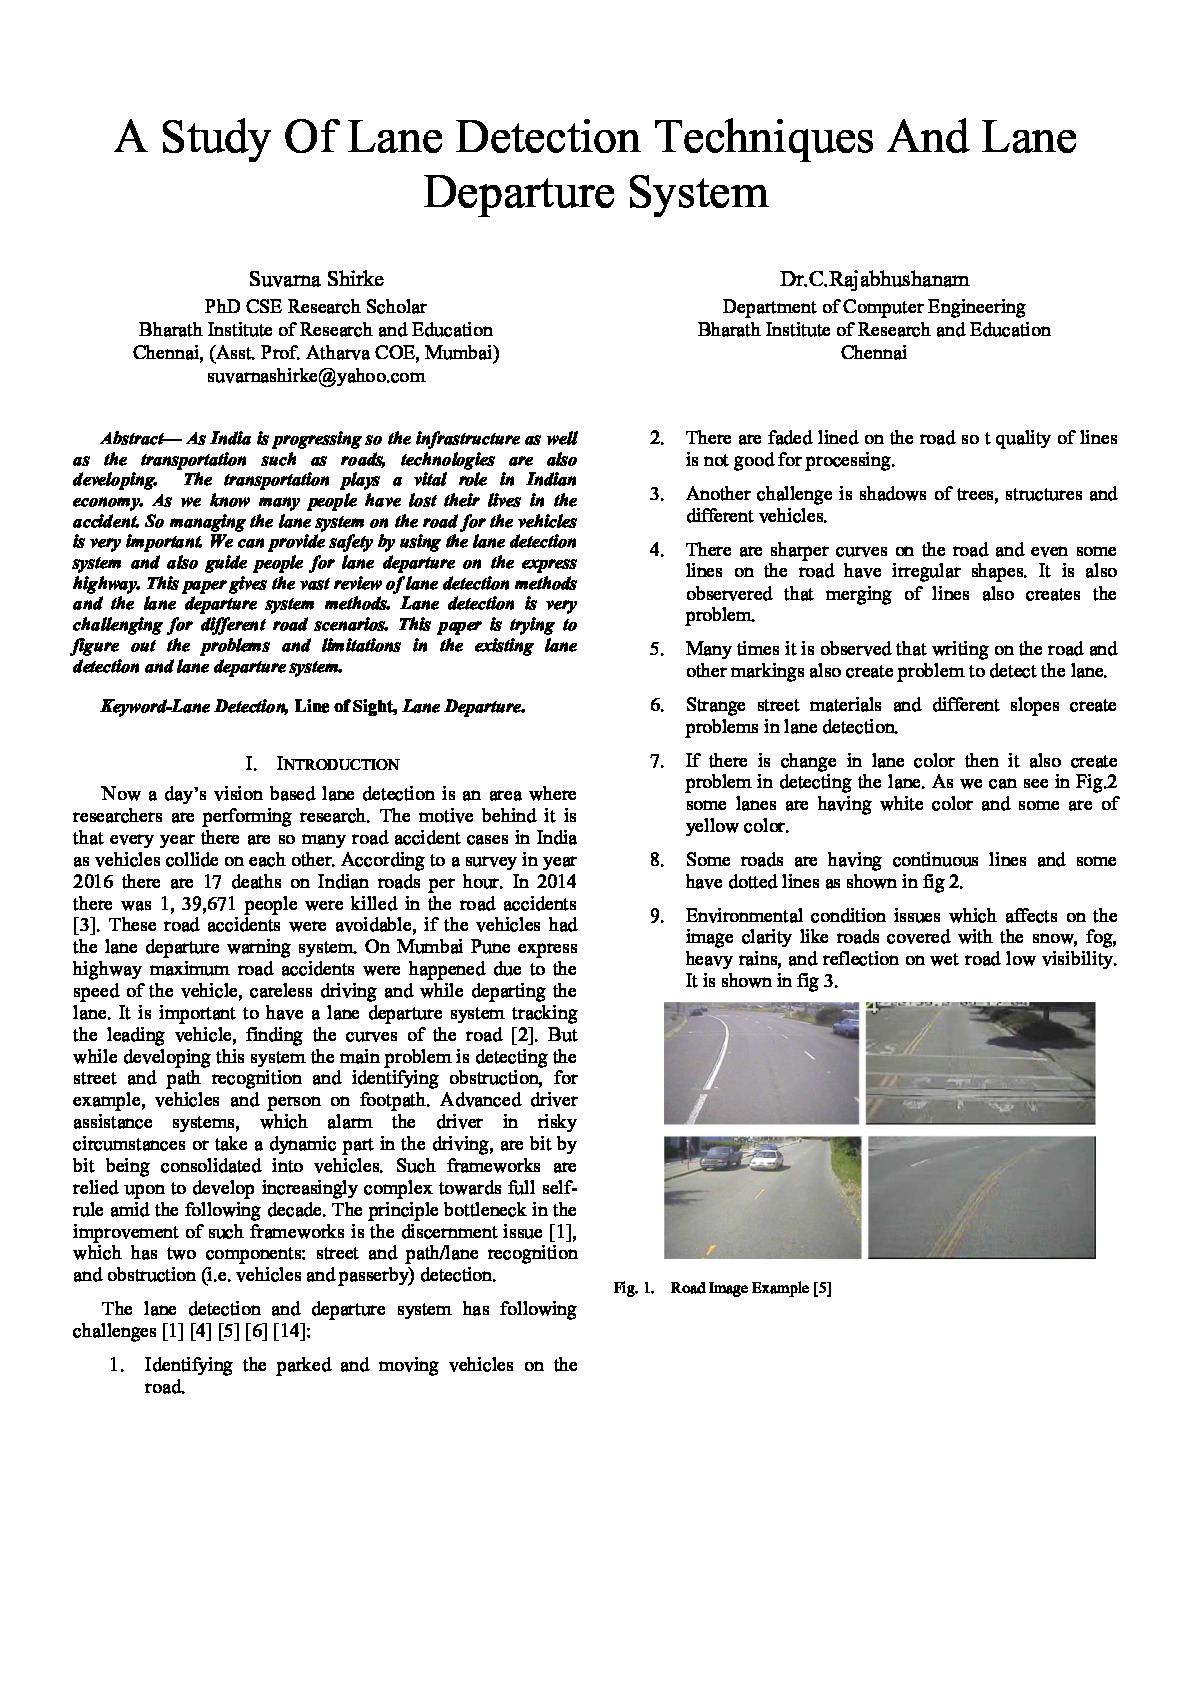 A_study_of_lane_detection_techniques_and_lane_departure_system